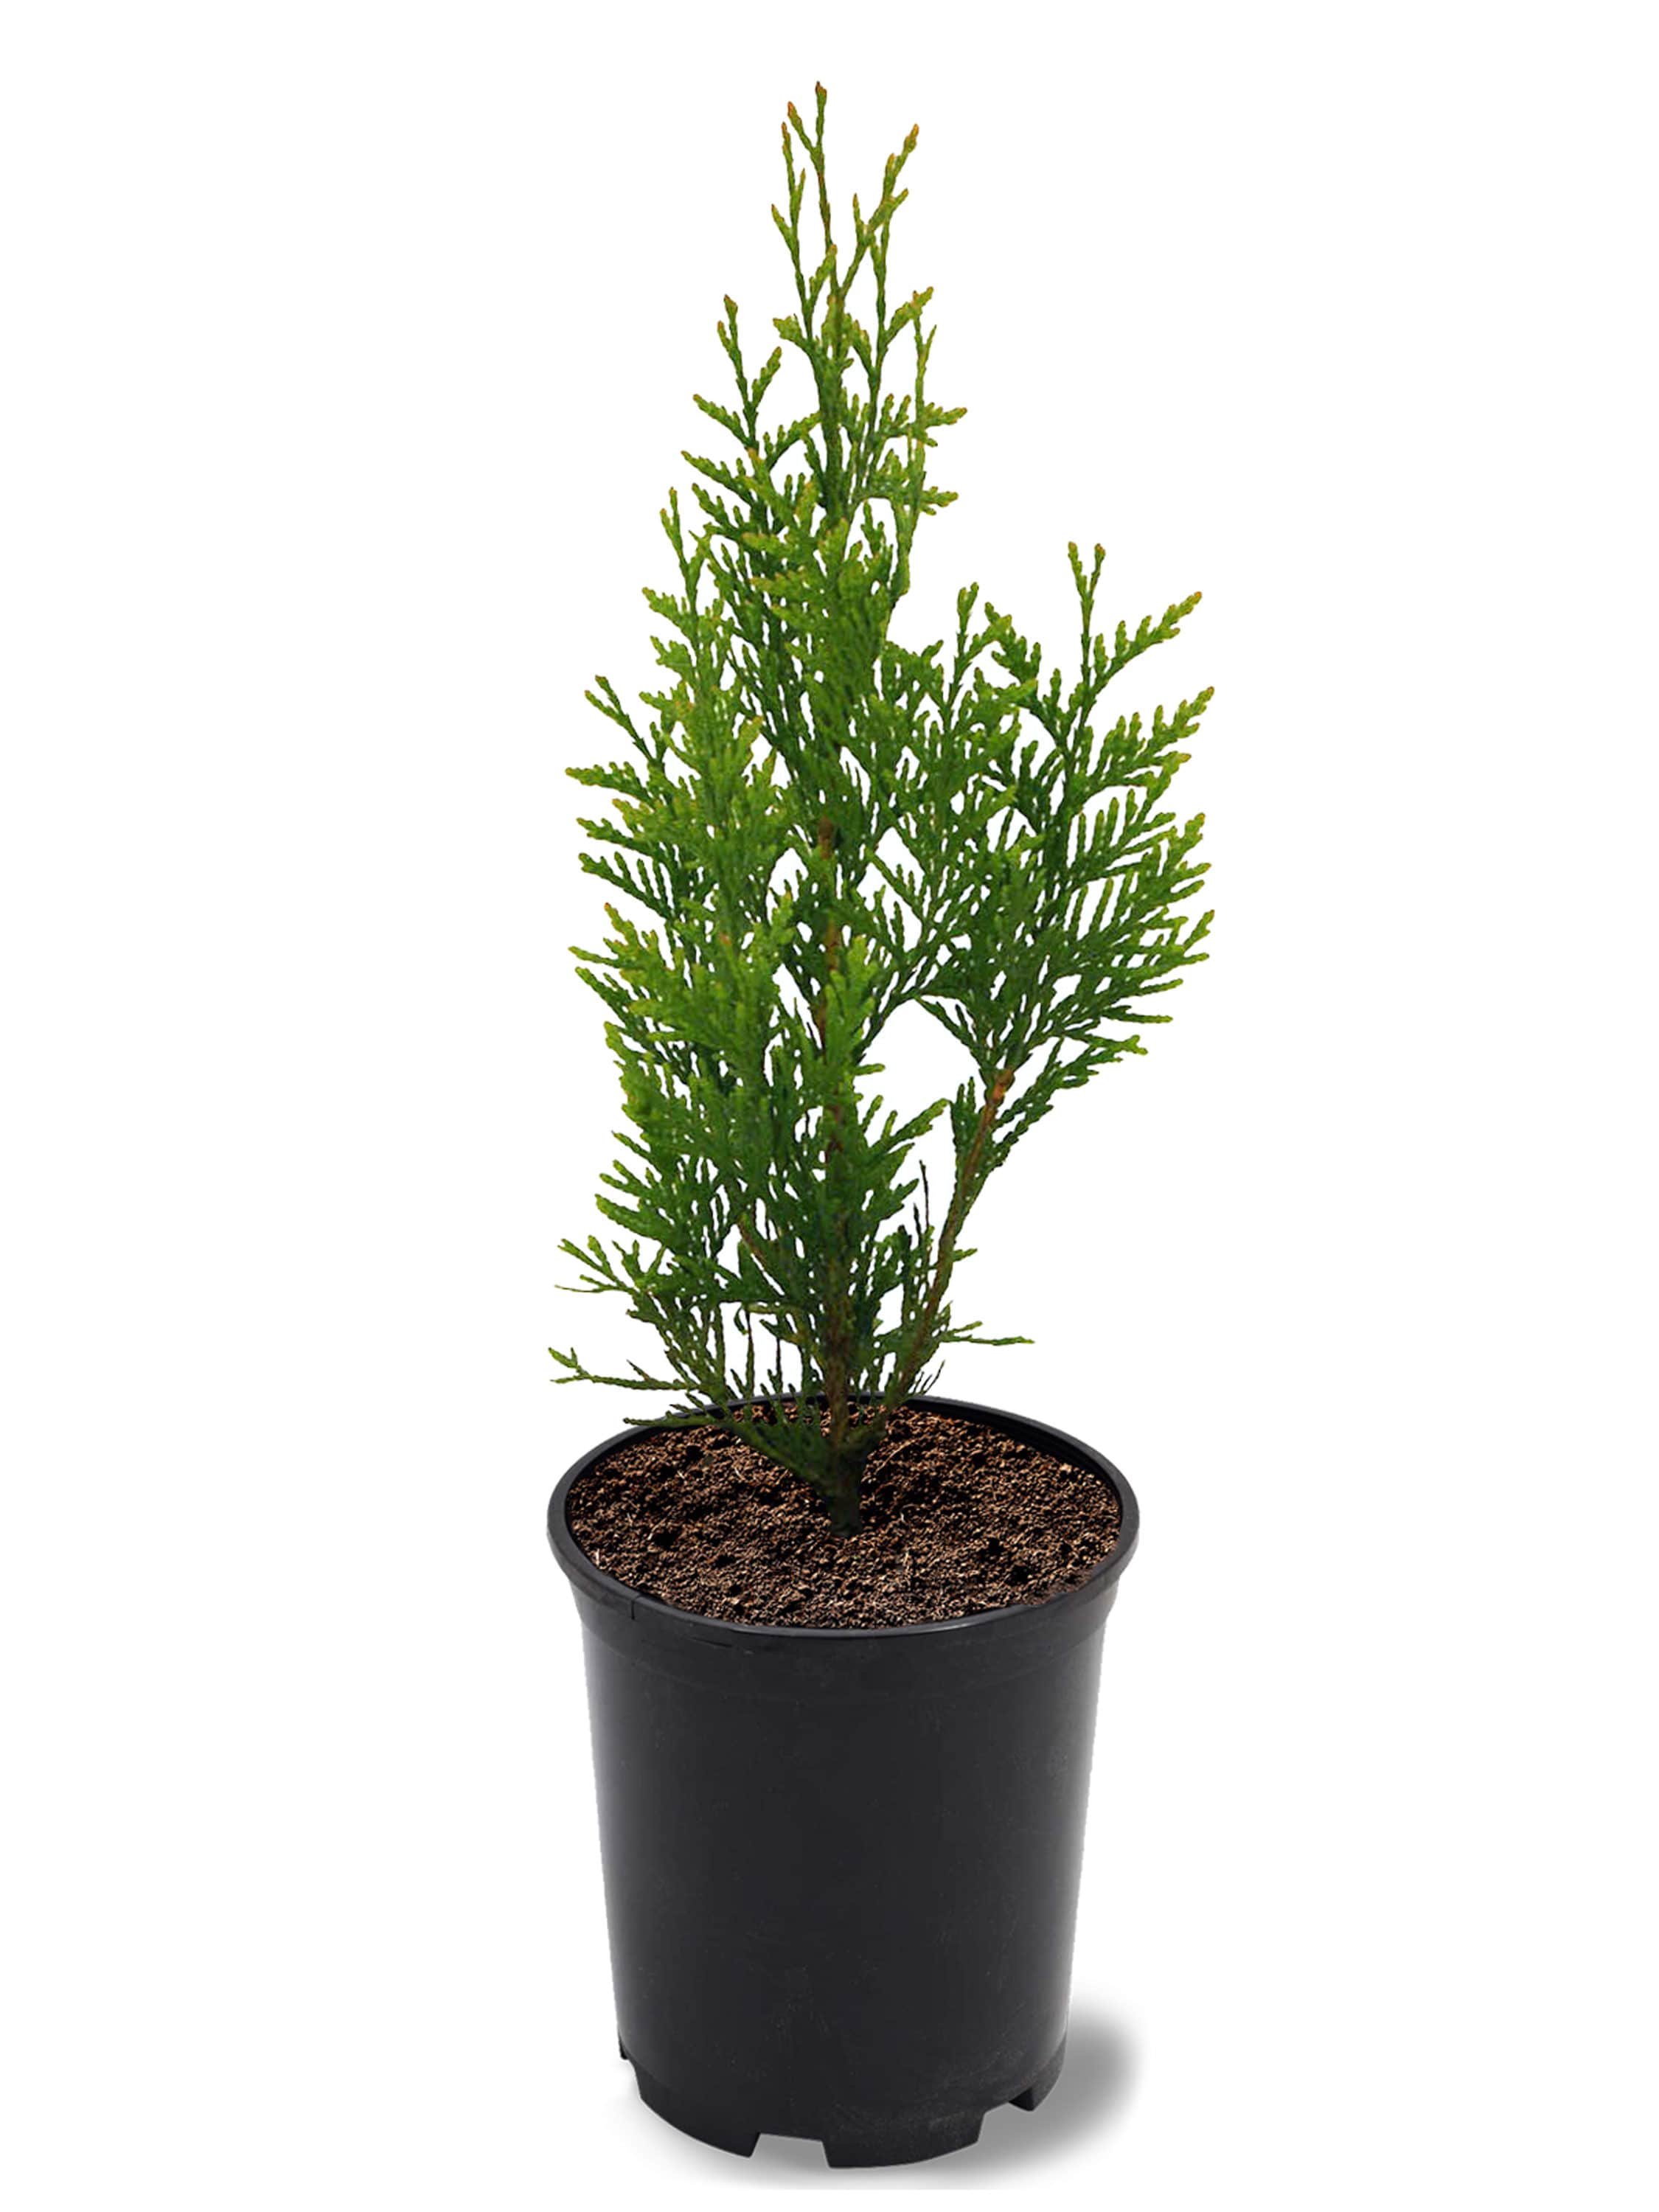 Southern Planters Screening Thuja Giant In Pot (With Soil) the Trees department Lowes.com